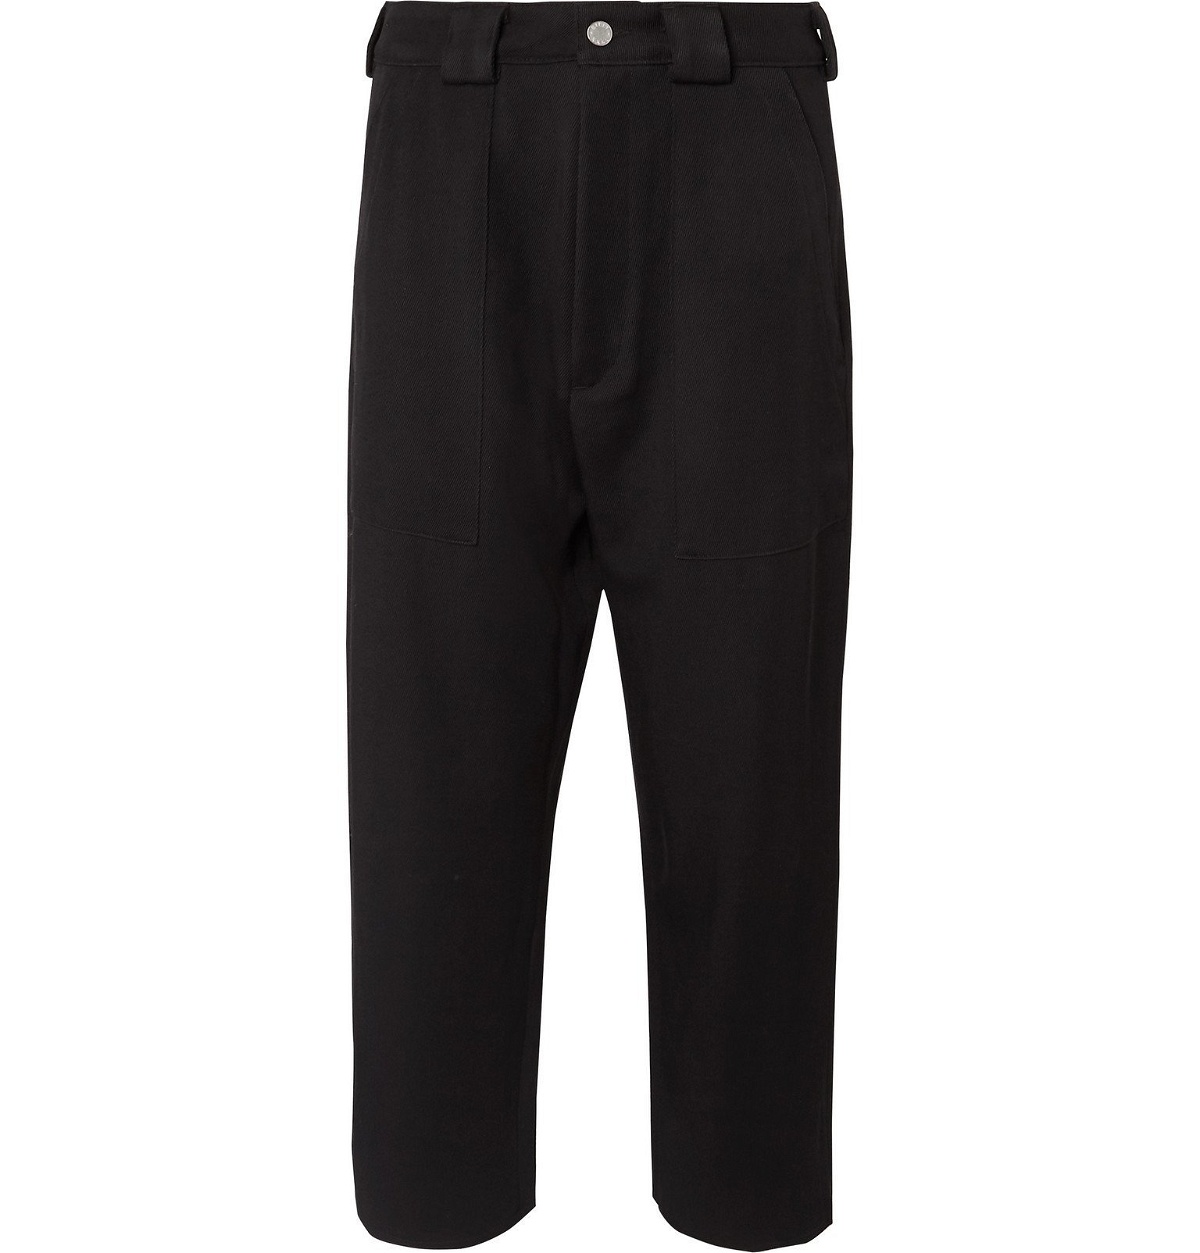 BILLY - Black Tapered Wool-Twill Suit Trousers - Black Billy